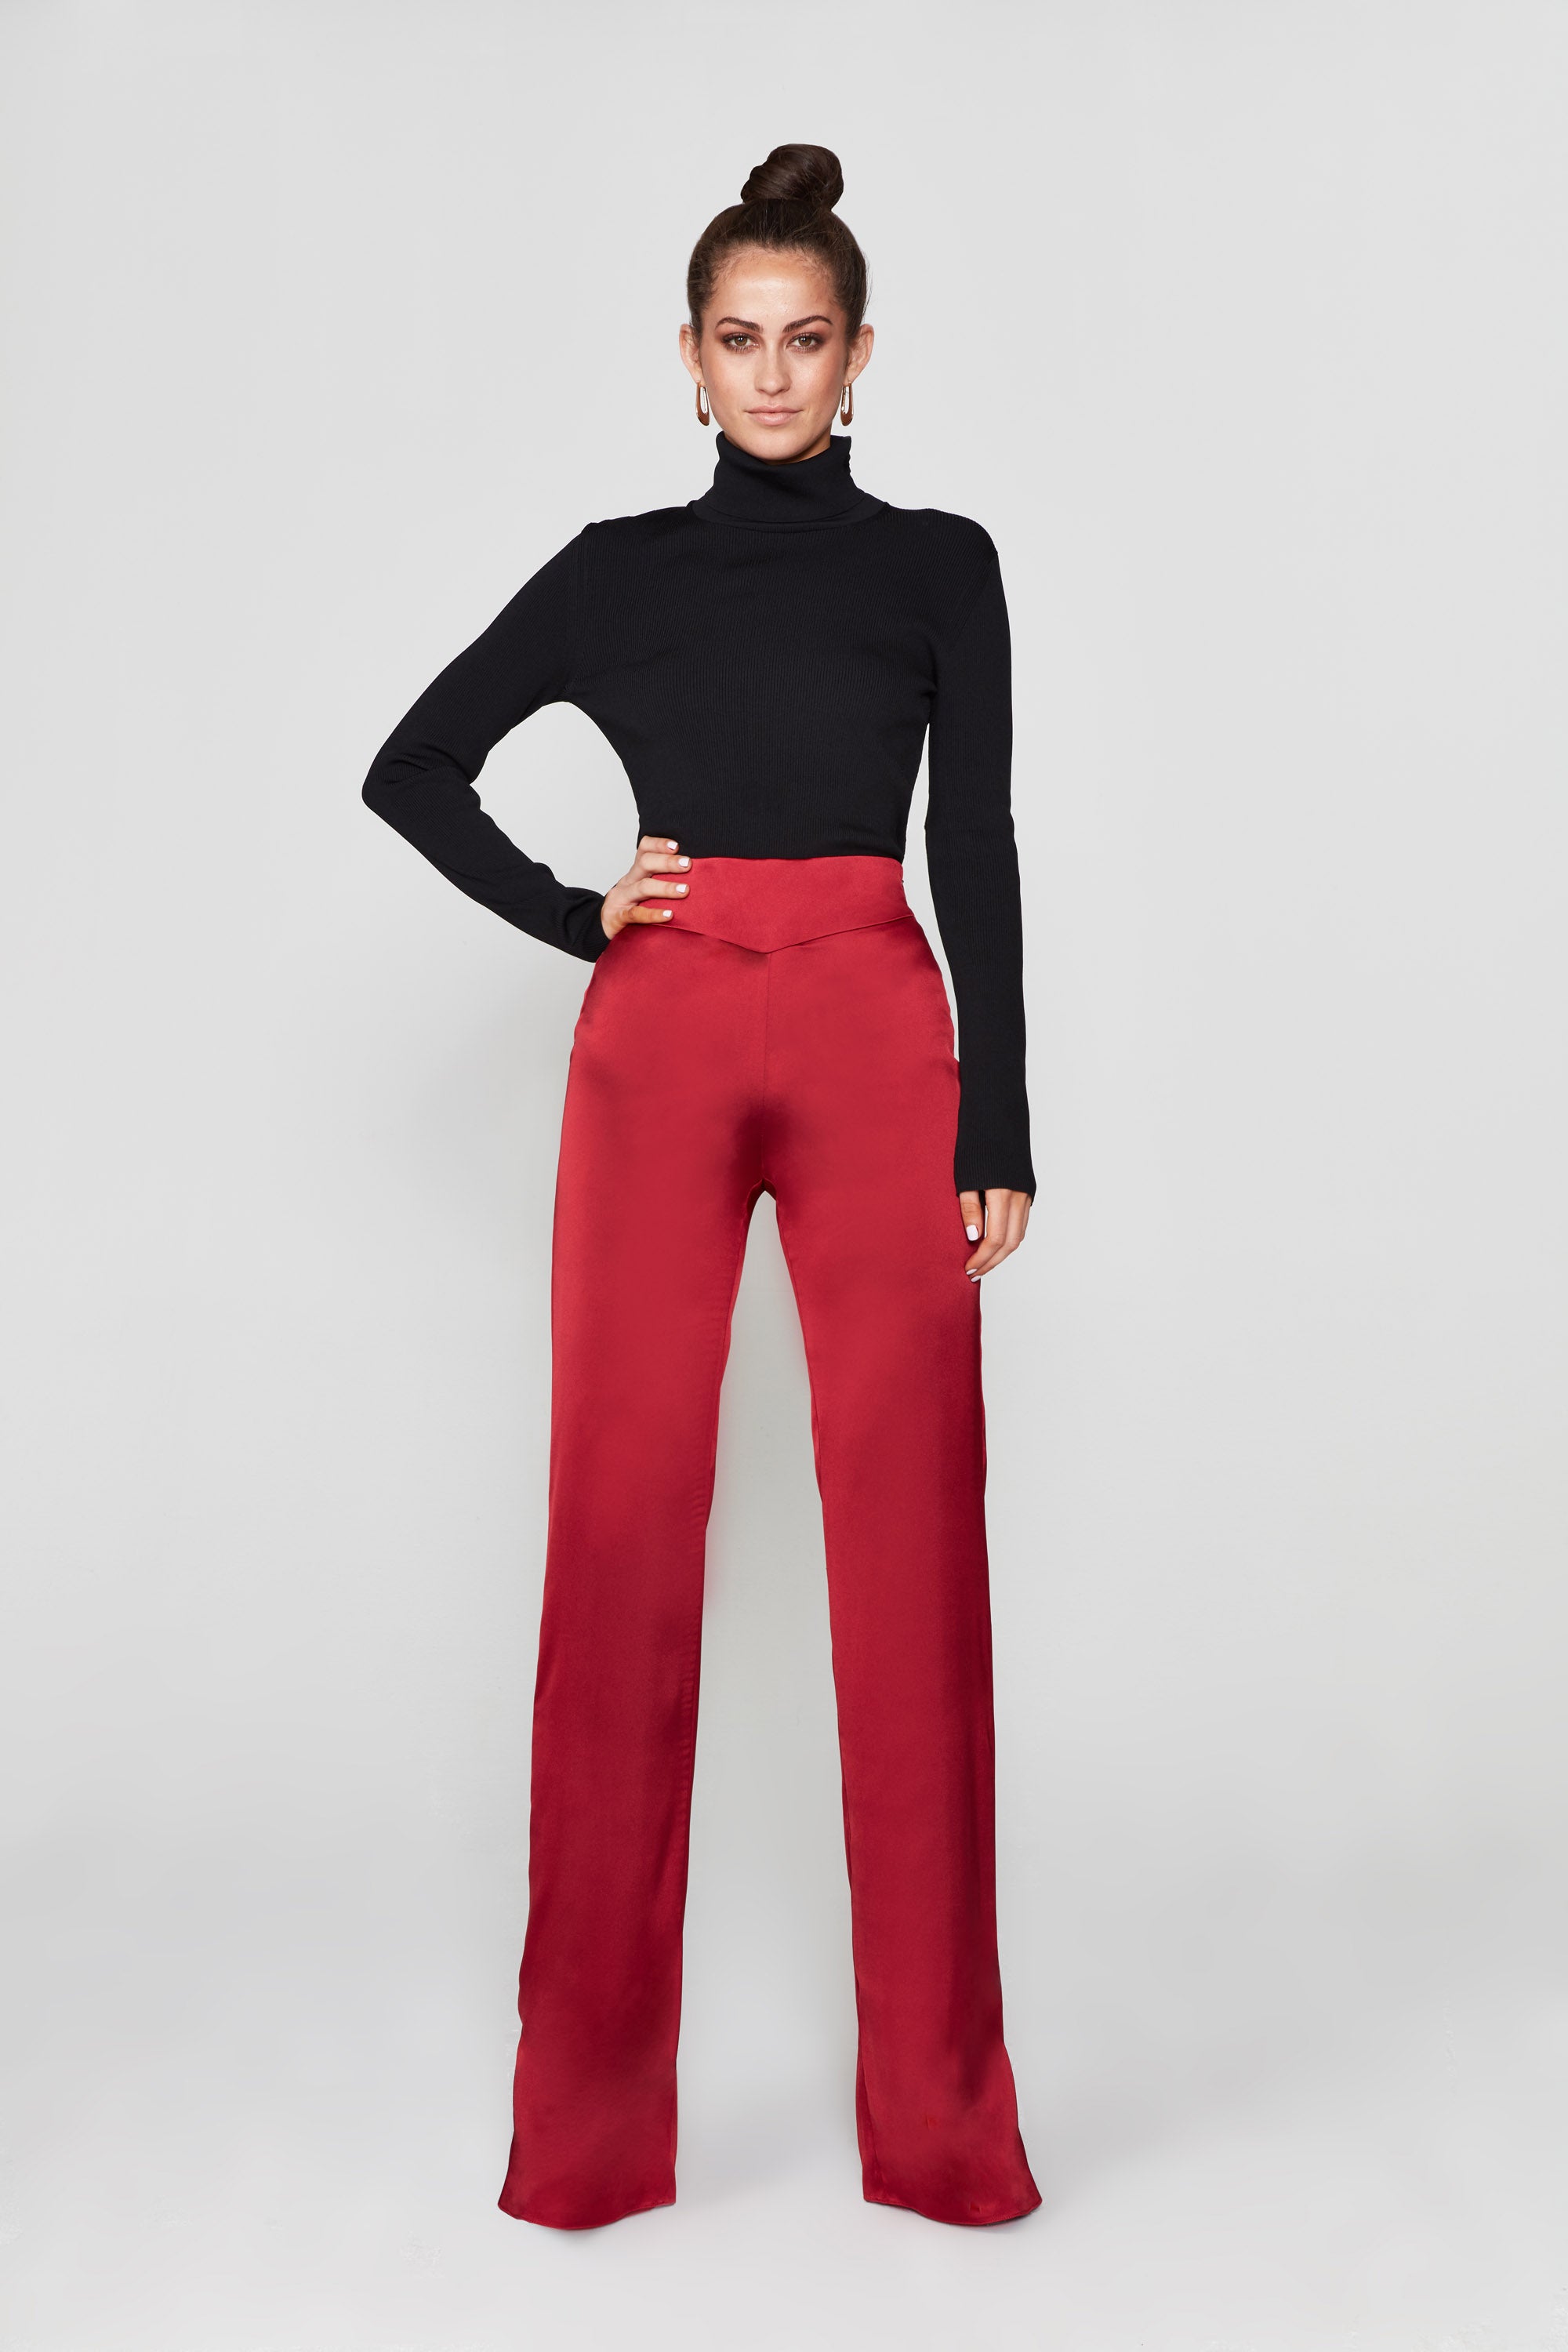 Red High Waisted Straight Leg Pants